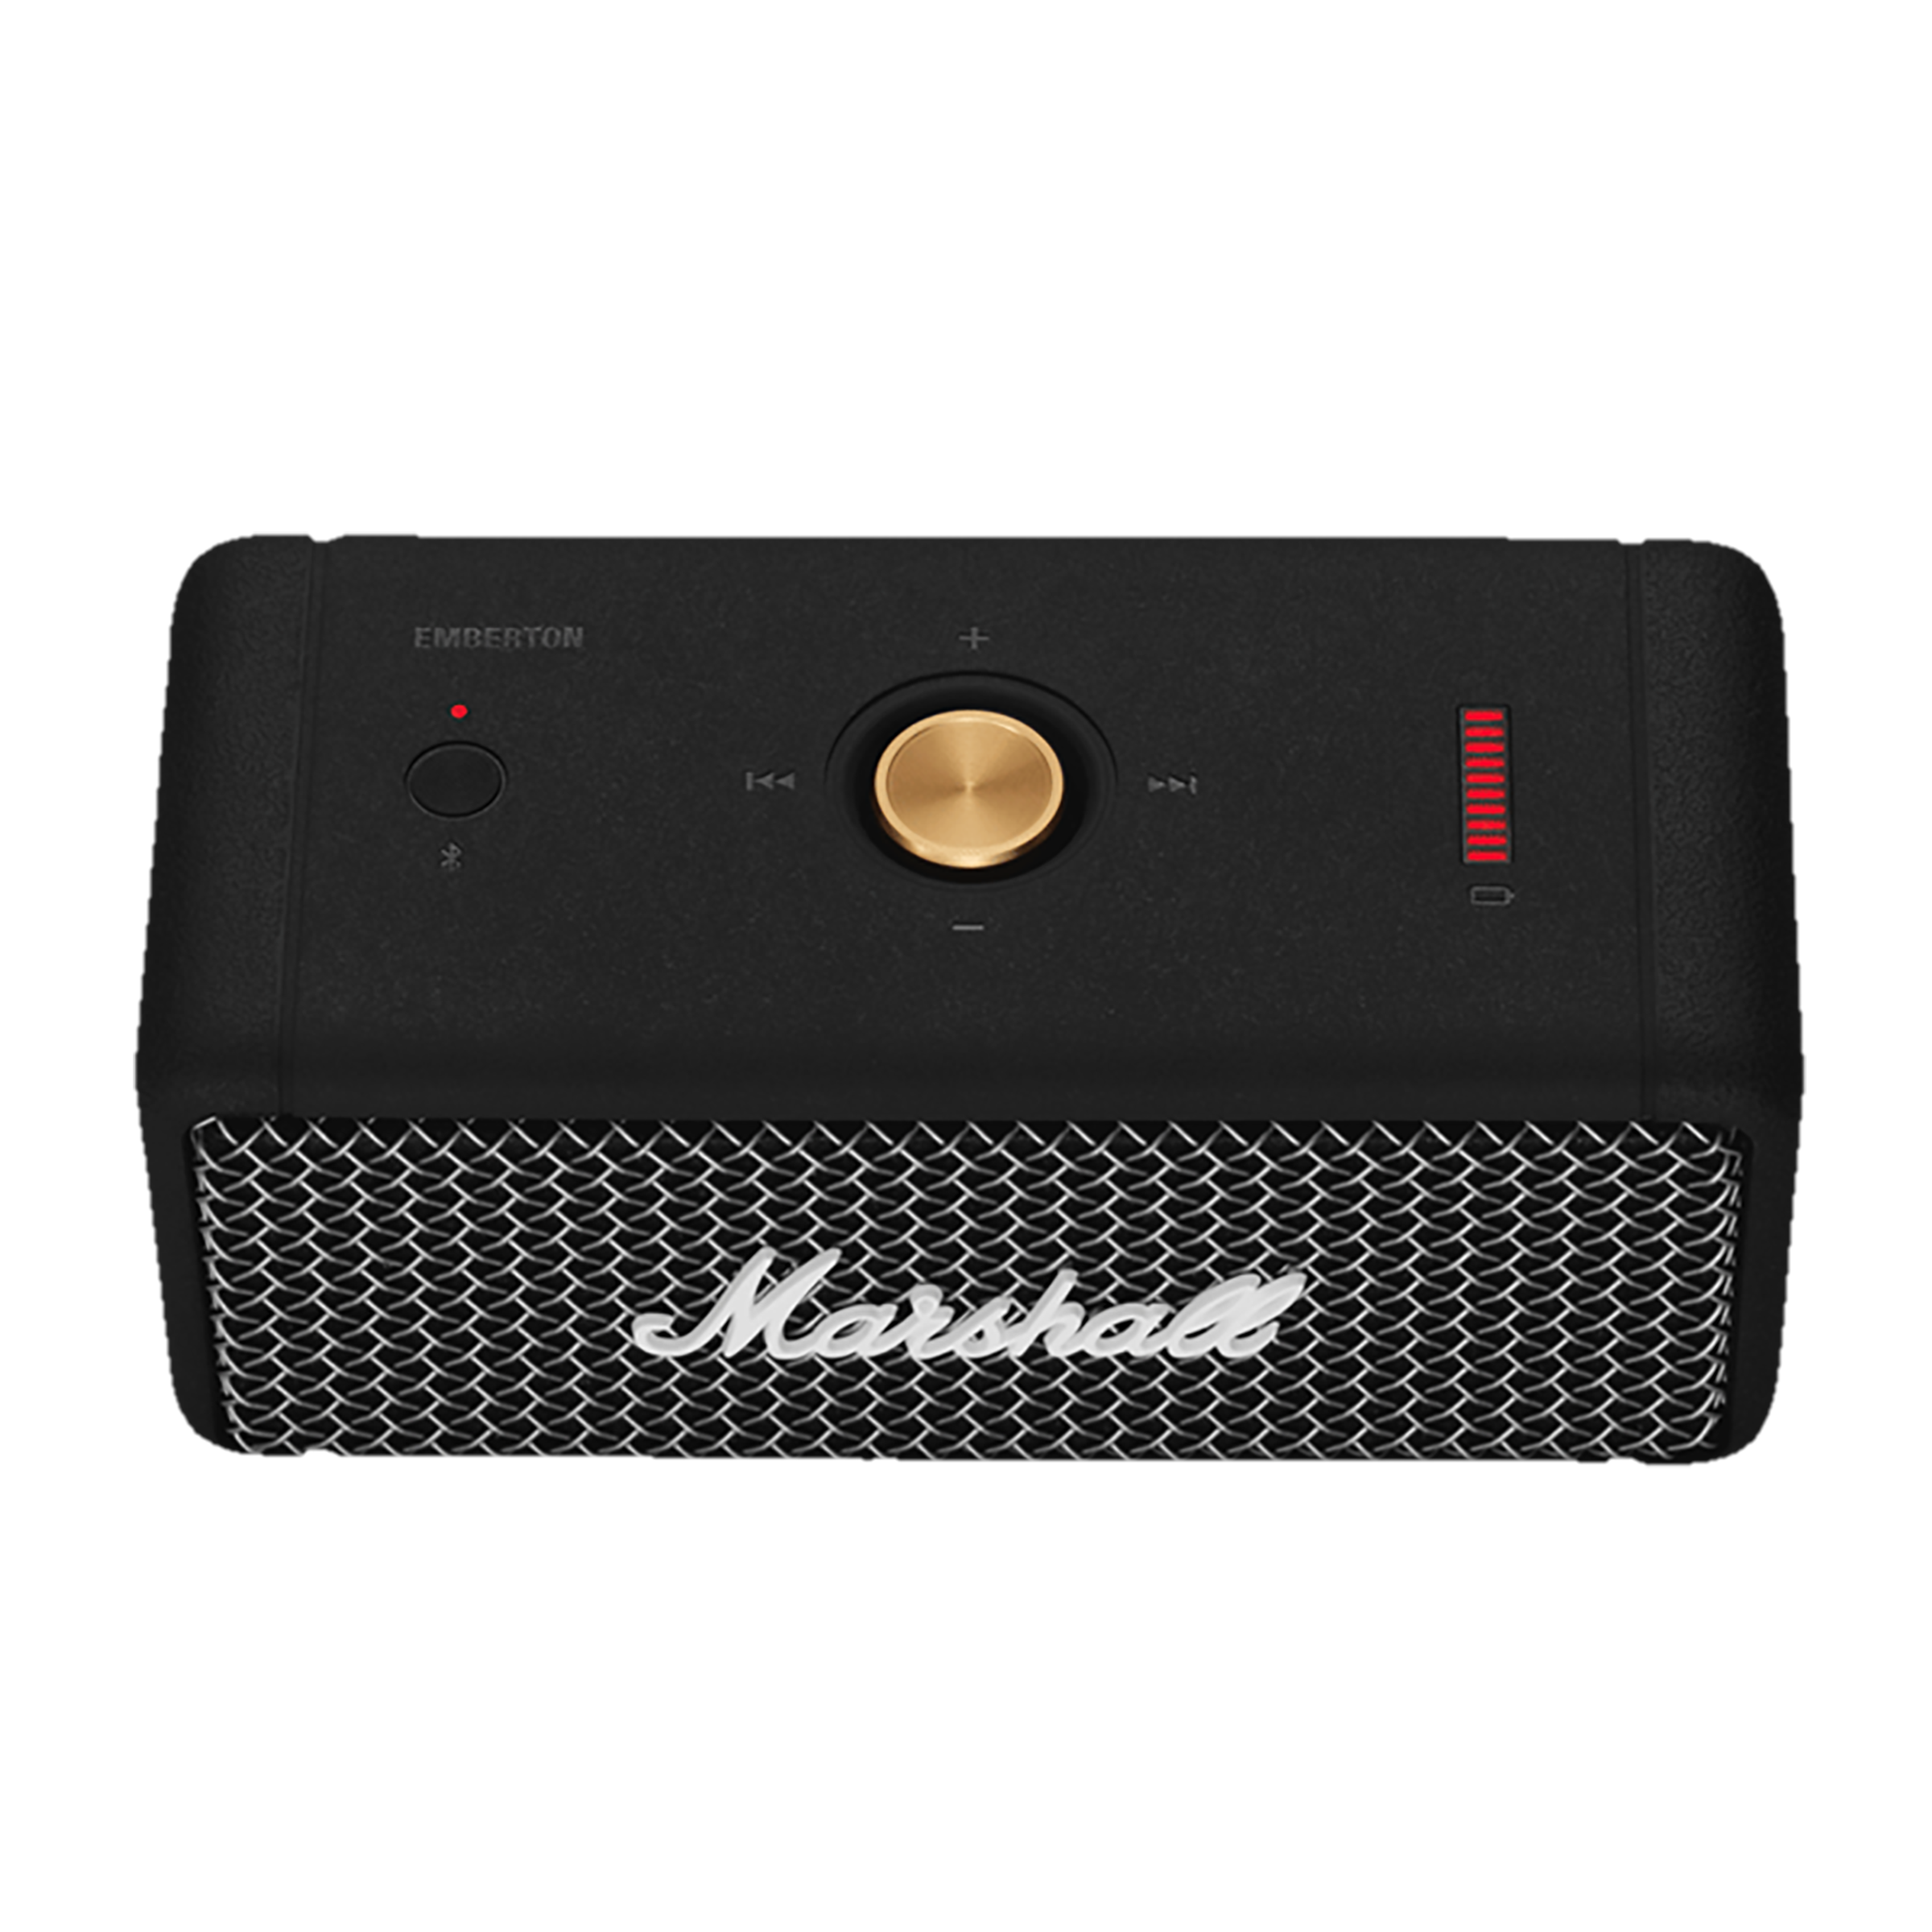 Buy Marshall Emberton Channel, Signature Speaker Stereo Sound, Black) Superior Portable Water 20W Resistant, Bluetooth (IPX7 Online – Croma